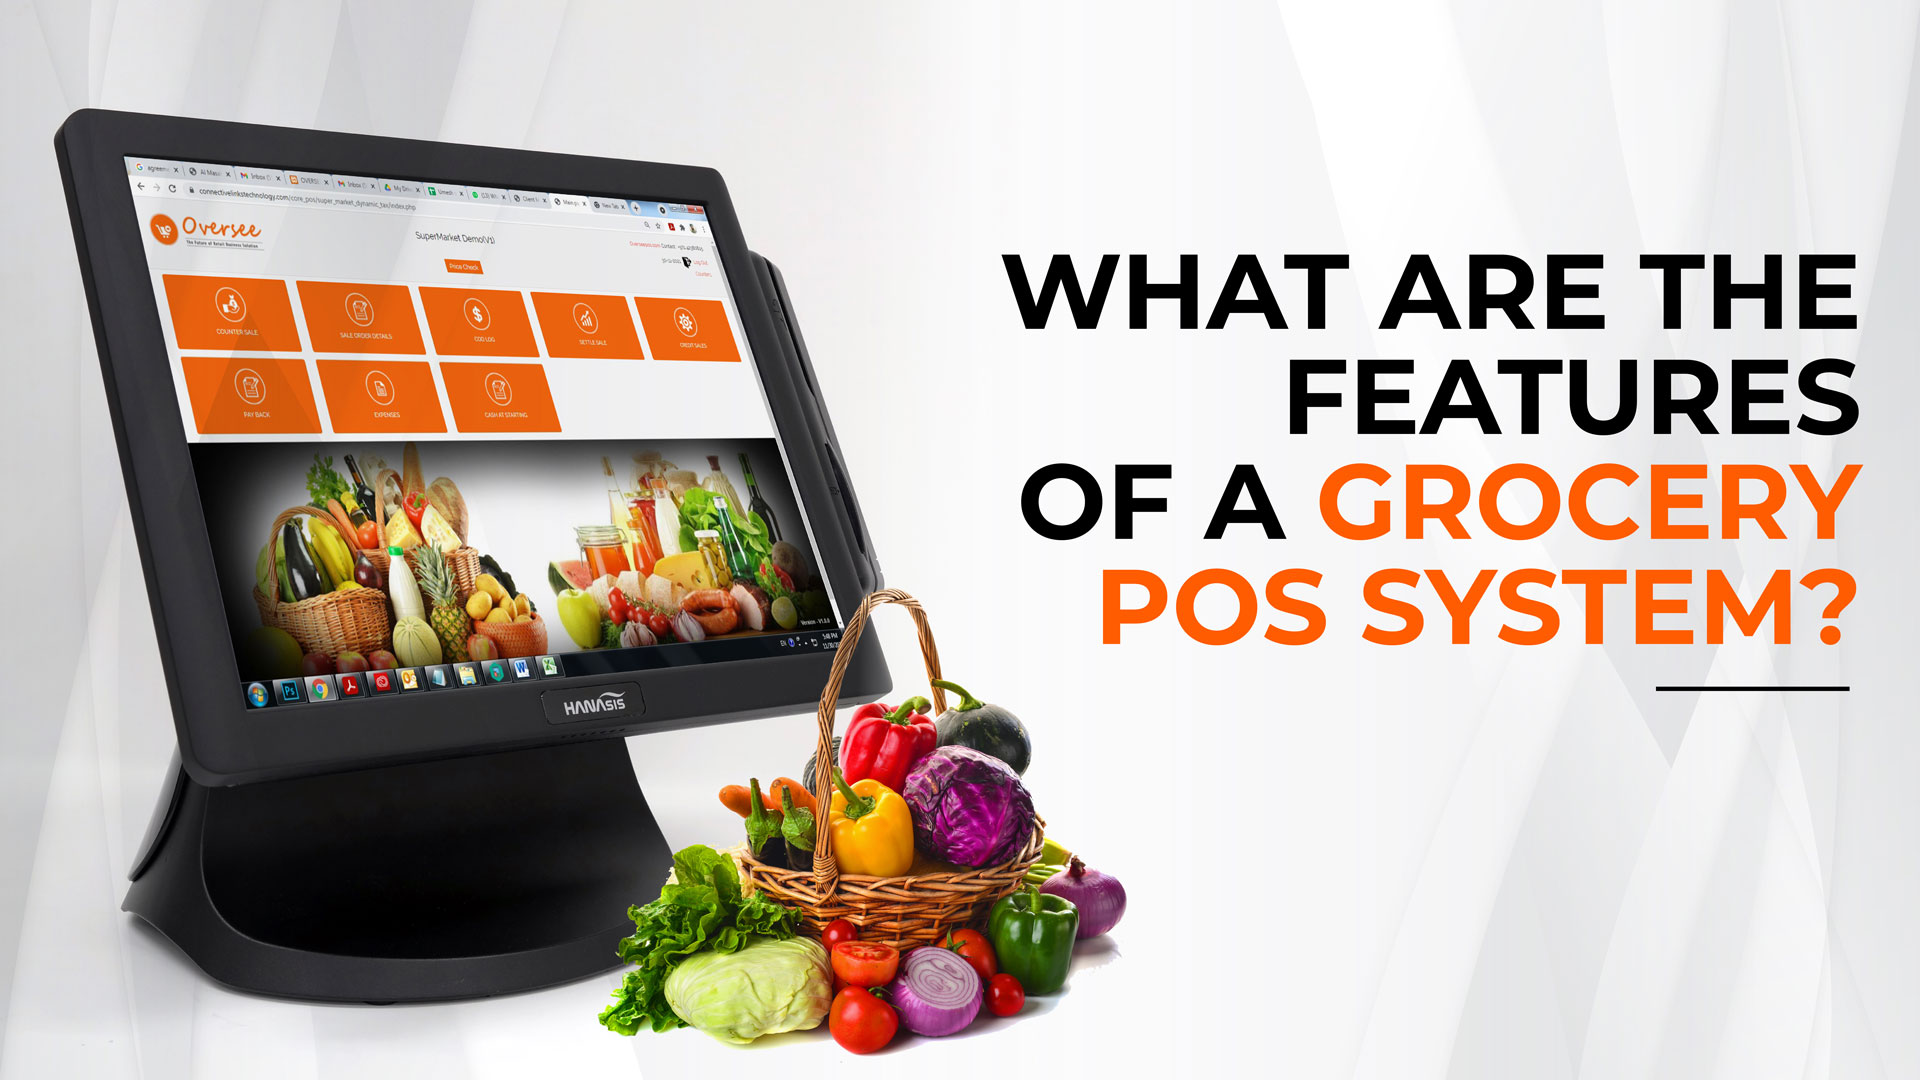 What are the features of a Grocery POS system?